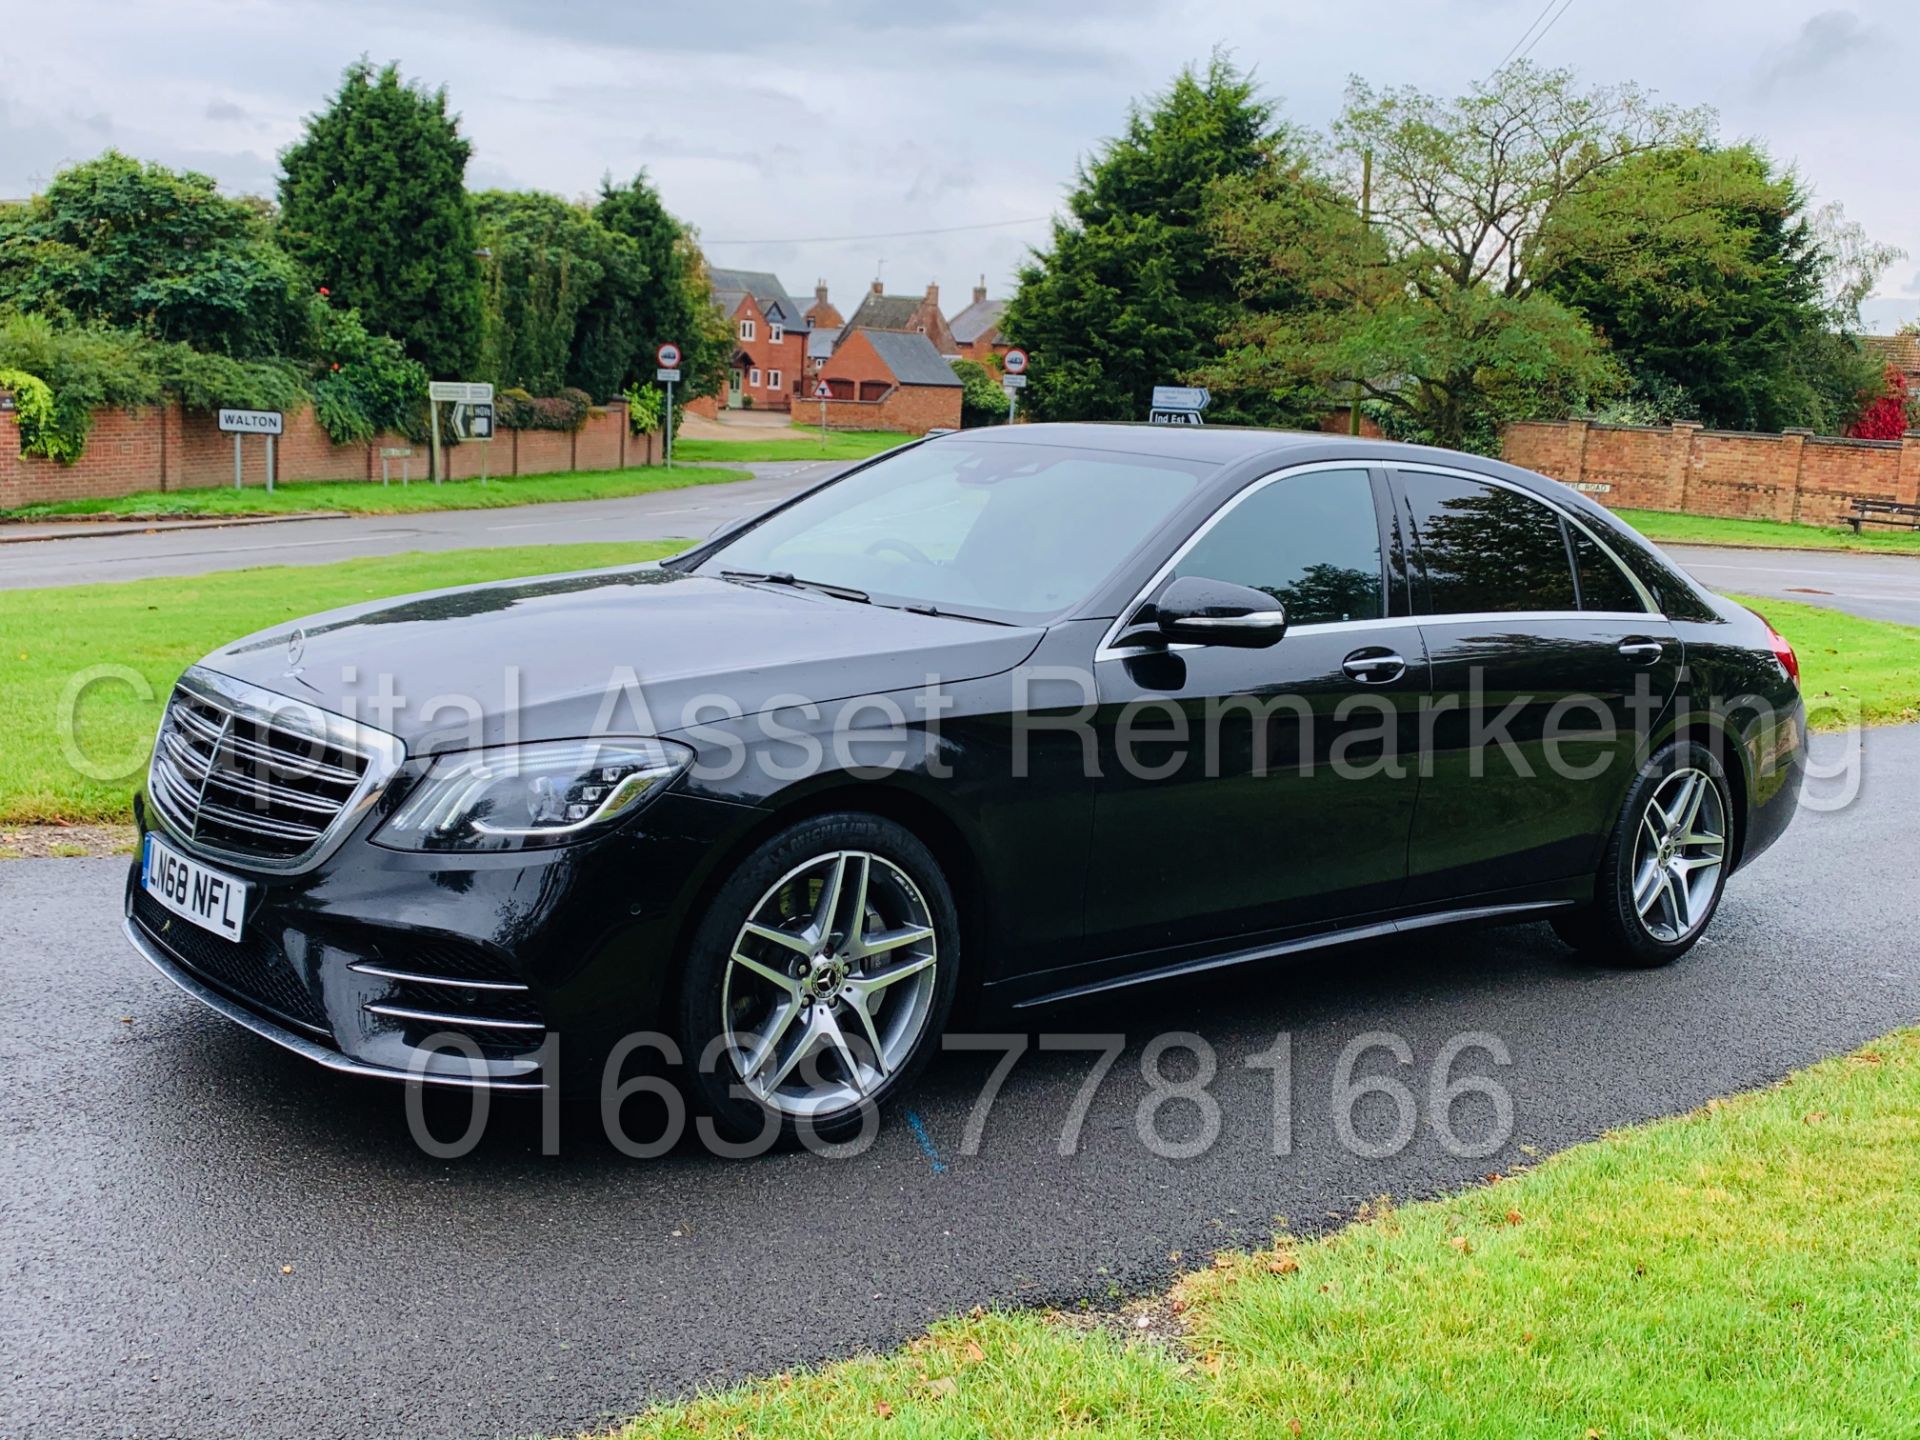 (On Sale) MERCEDES-BENZ S350D LWB *AMG LINE-EXECUTIVE SALOON* (68 REG) 9-G TRONIC *TOP OF THE RANGE* - Image 7 of 63